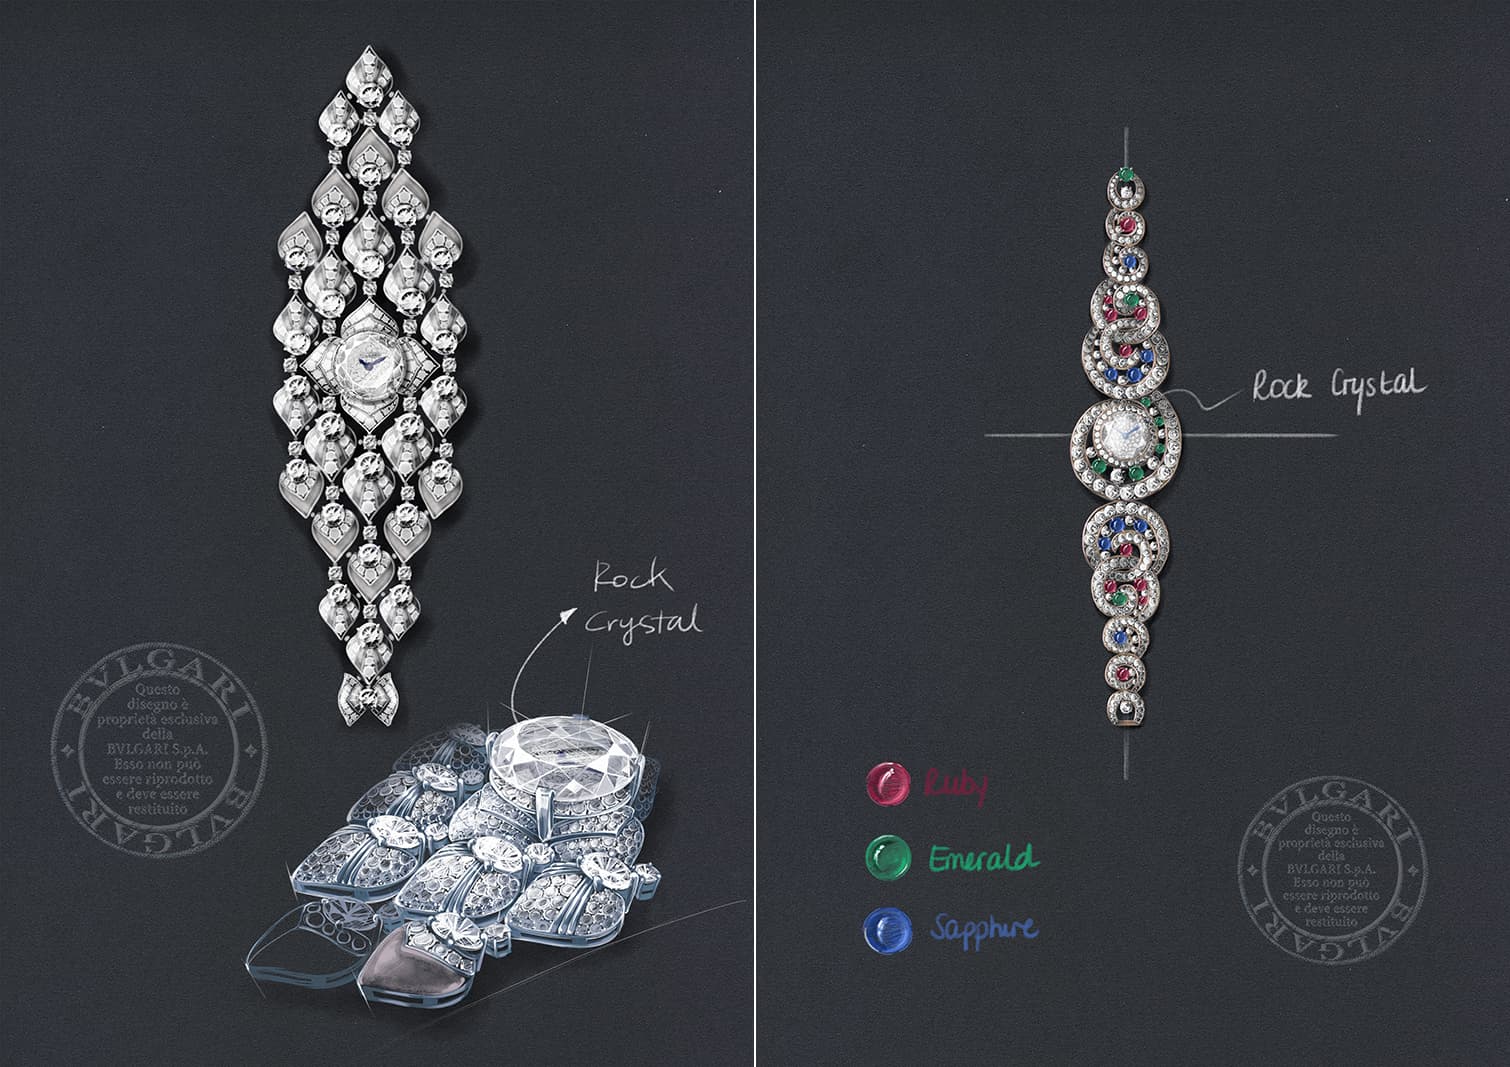 Designing the Bulgari Diamond Swan High Jewellery secret watch from the MAGNIFICA collection with a 7 carat rock crystal dial cover